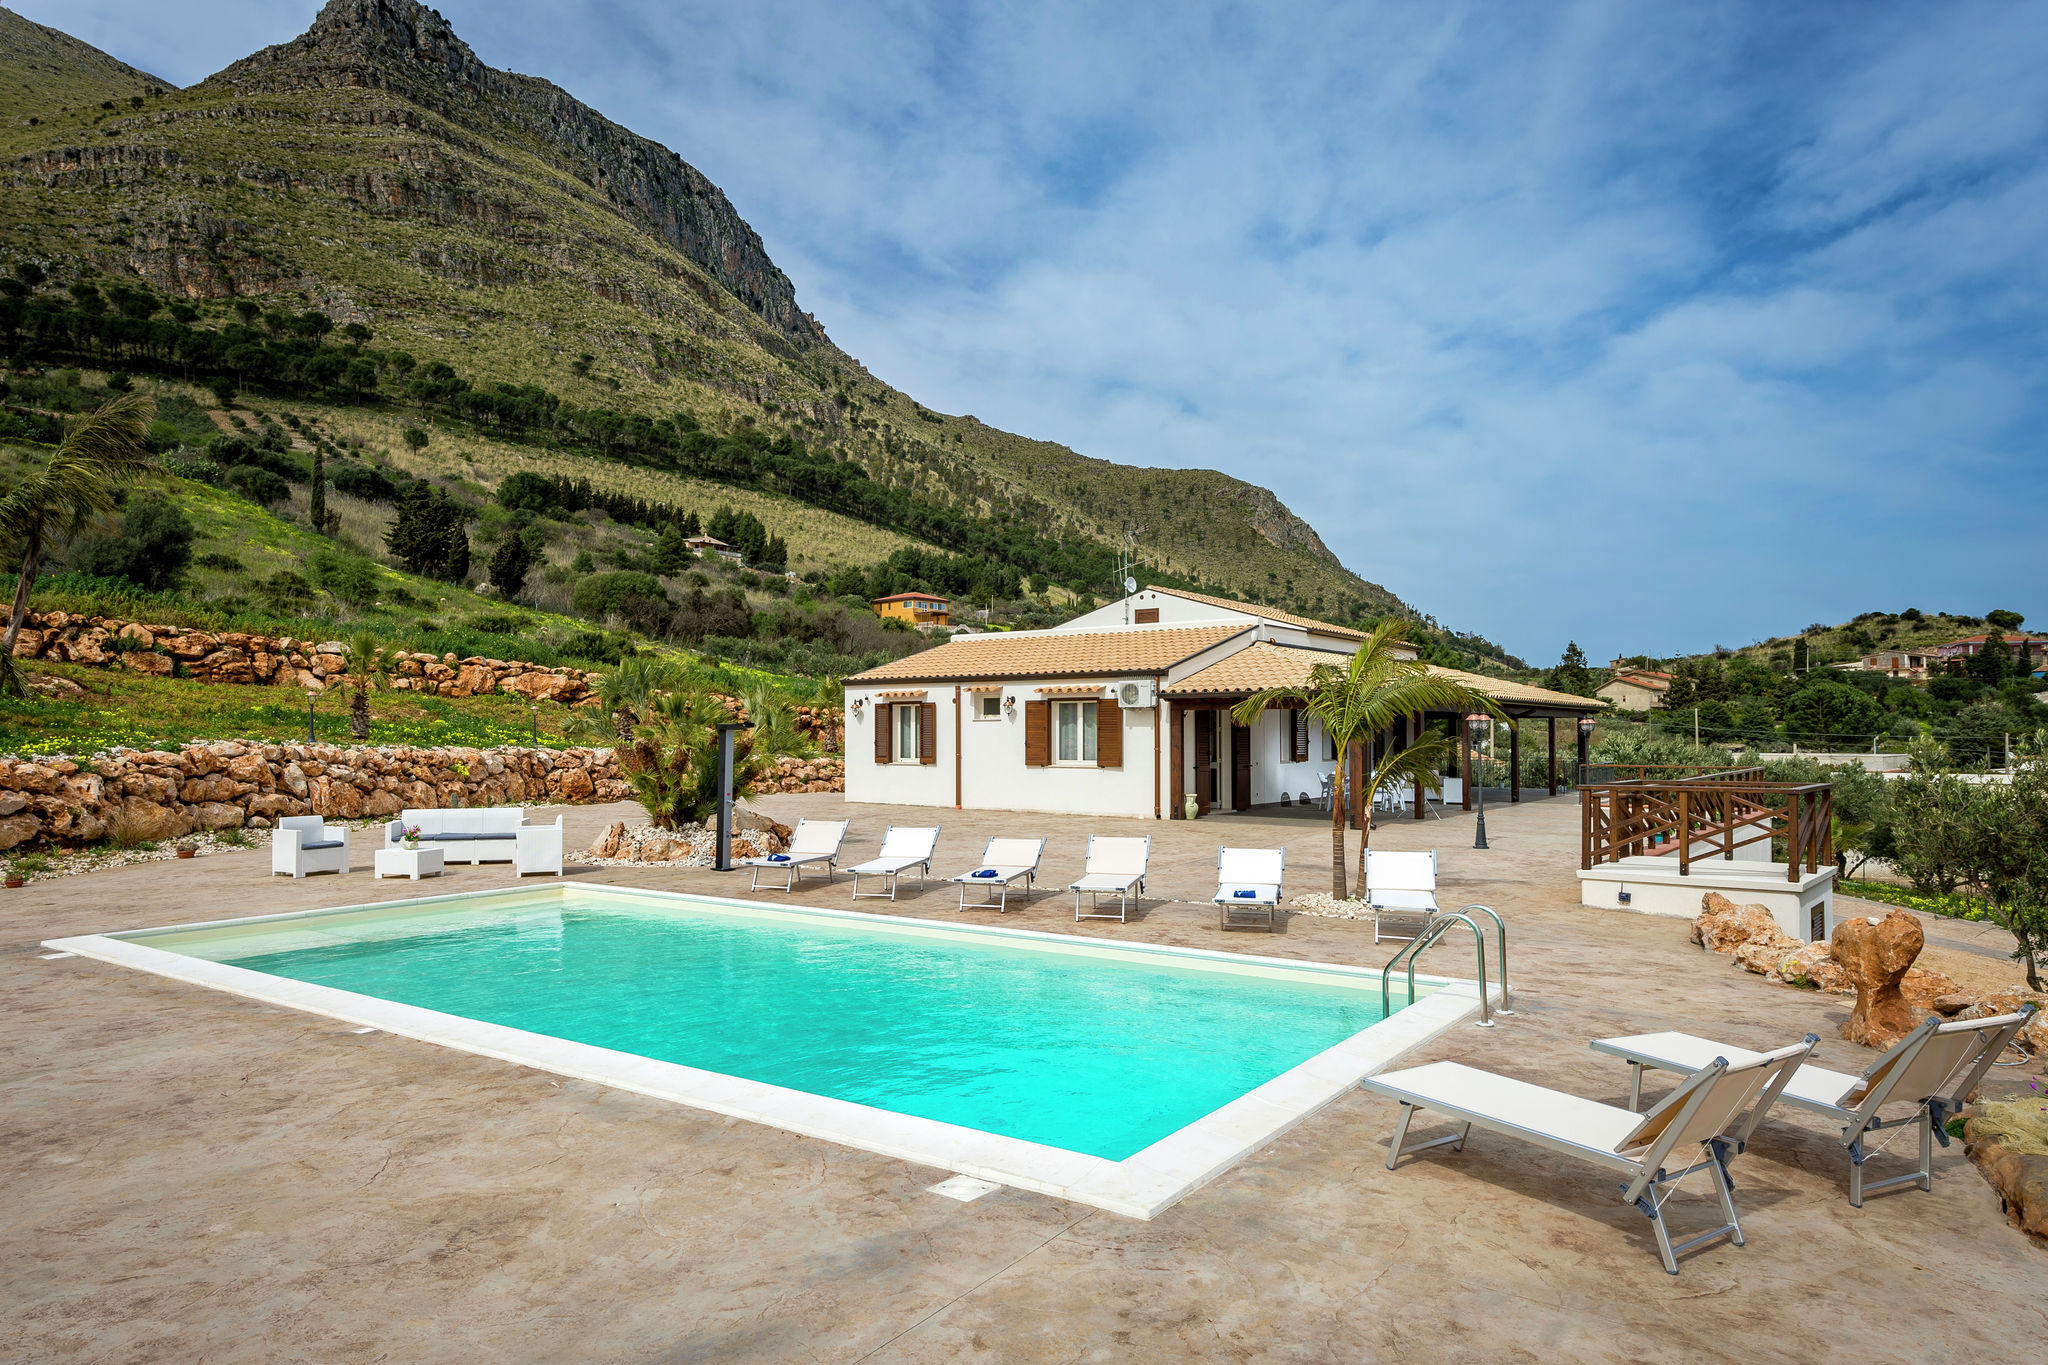 Fantastic unattached villa with private-swimmingpool in stunning part of Sicily.